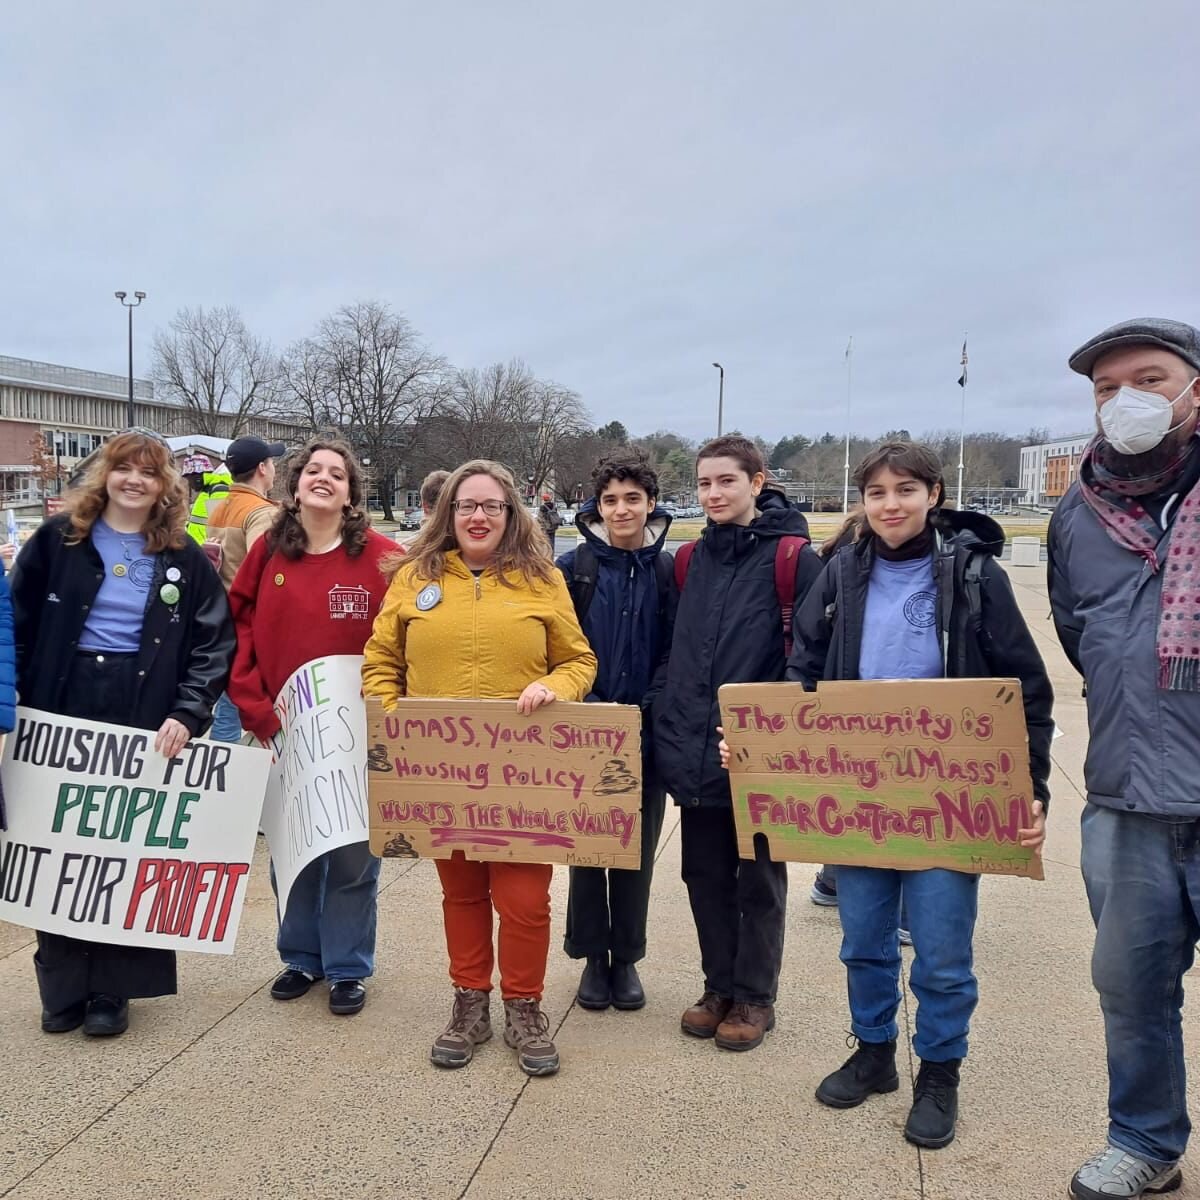 Did you know that the new housing units for graduate workers @umass would cost them nearly 80% (!!!) of their monthly stipend? Last week, @geo_uaw2322  demanded for an end to skyrocketing housing costs.

MassJwJ chanted and demonstrated alongside gra